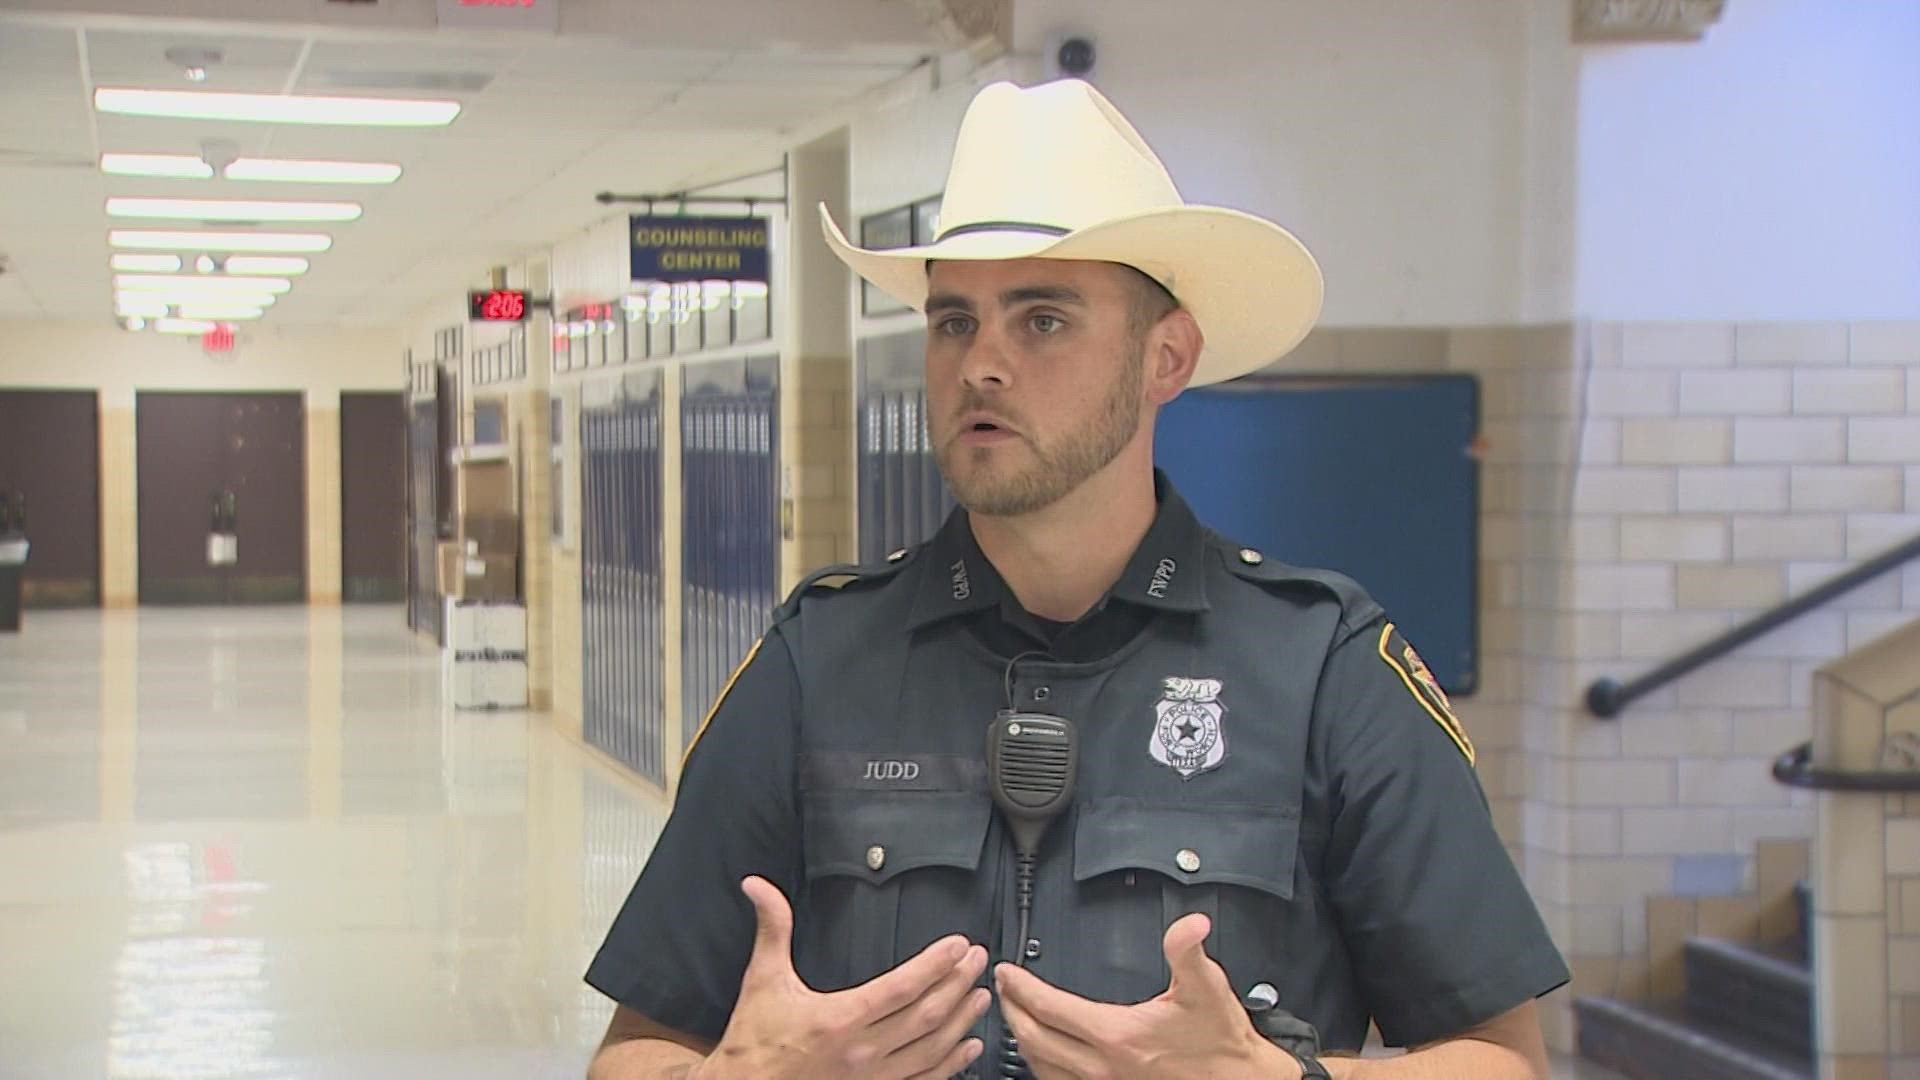 Nothing is more important to Fort Worth Police Officer Ethan Judd than making sure his school building is safe.